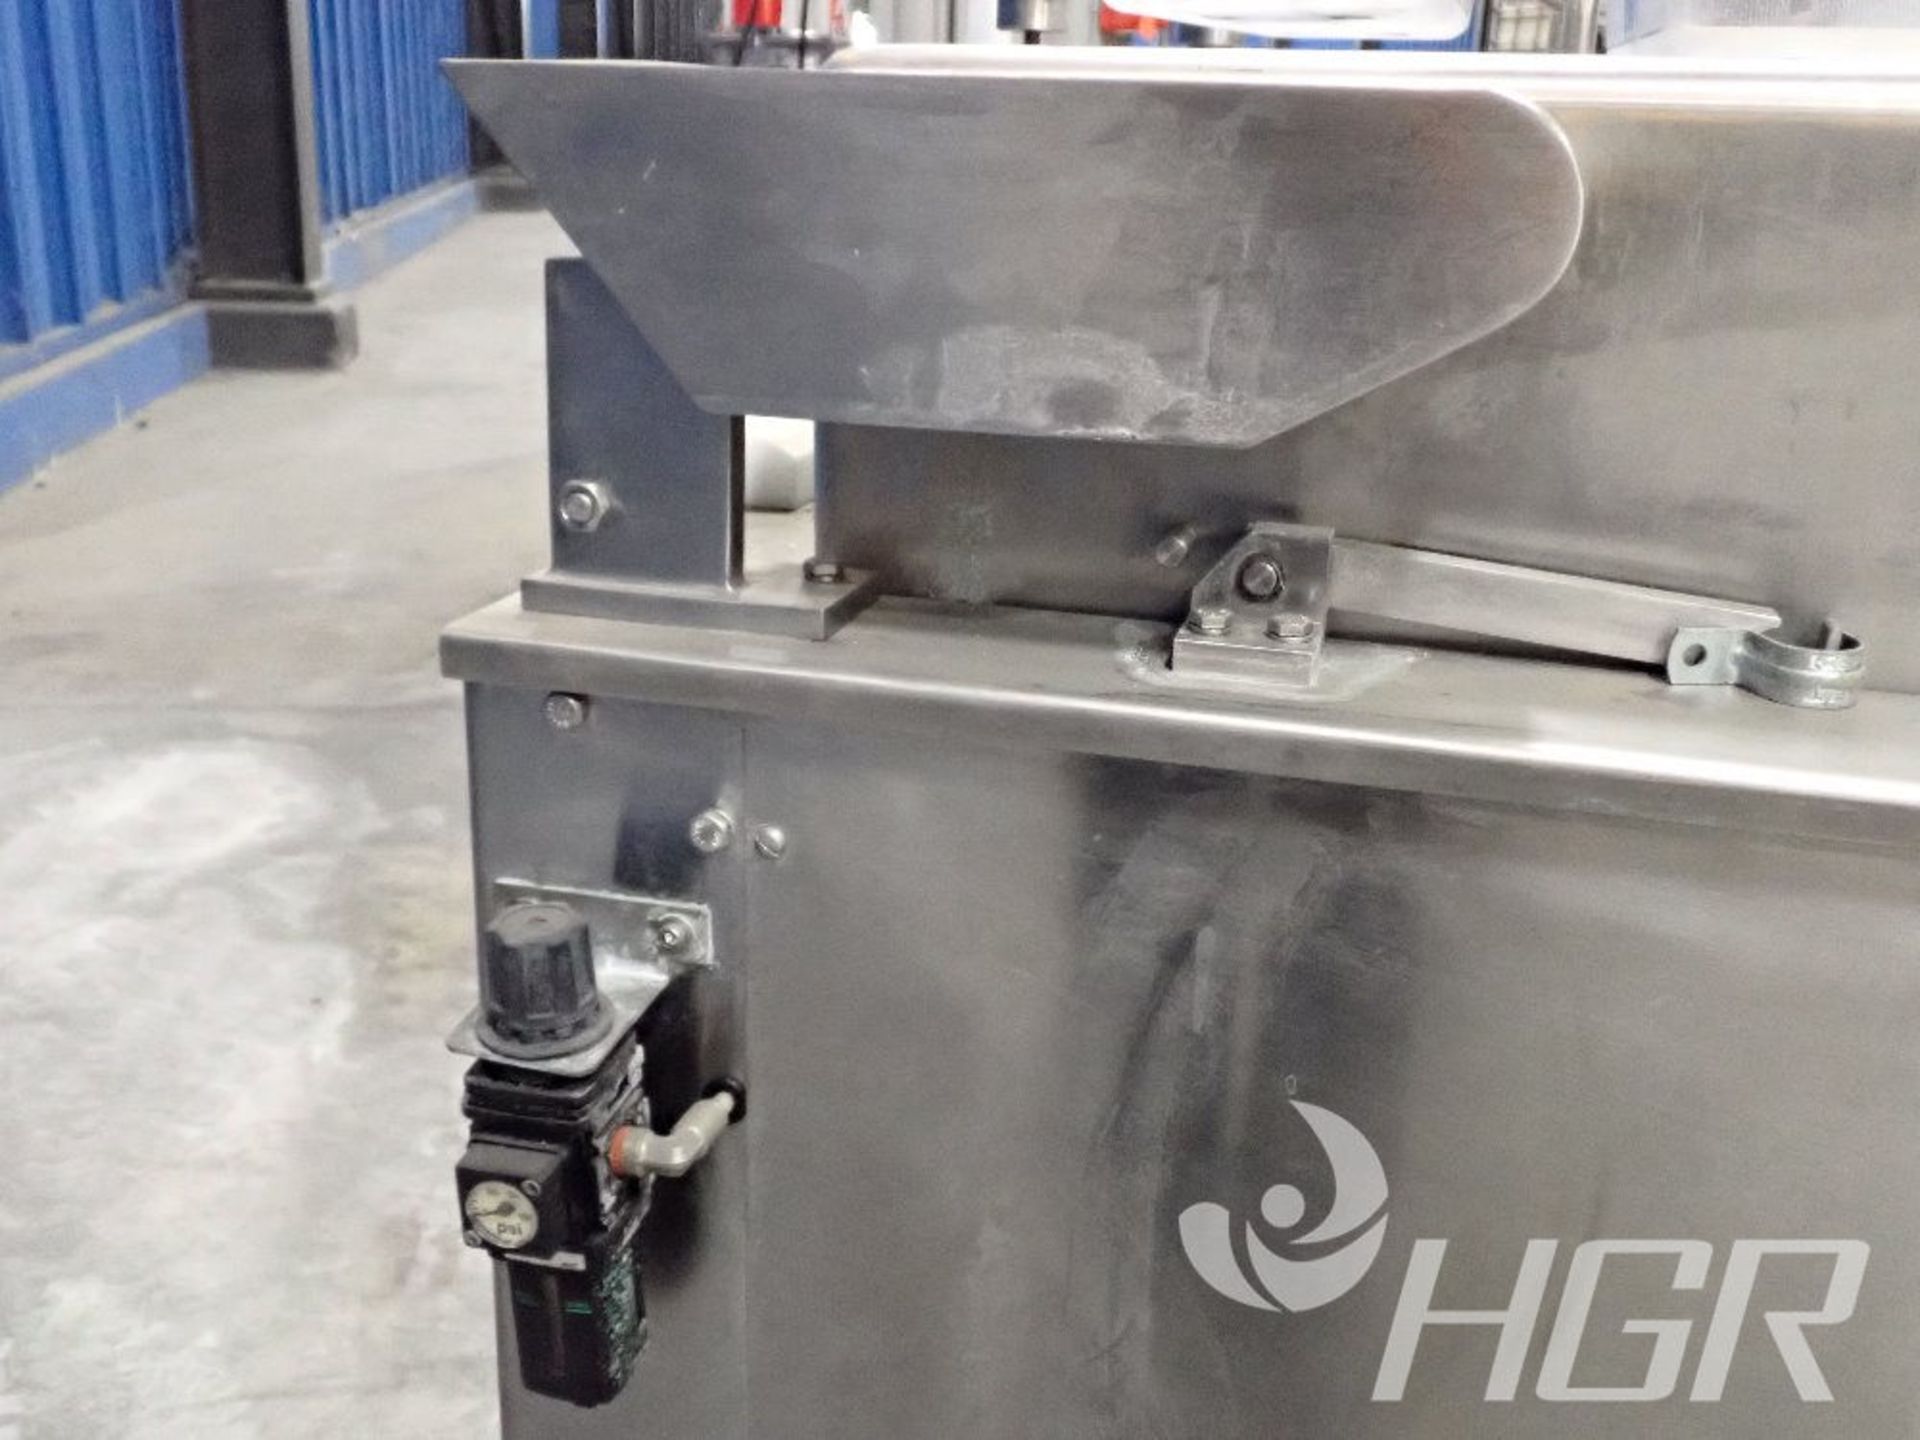 COZZOLI CLEANING STATION, Model n/a, Date: n/a; s/n GW24-242, Approx. Capacity: 21X15, Power: n/a, - Image 11 of 16